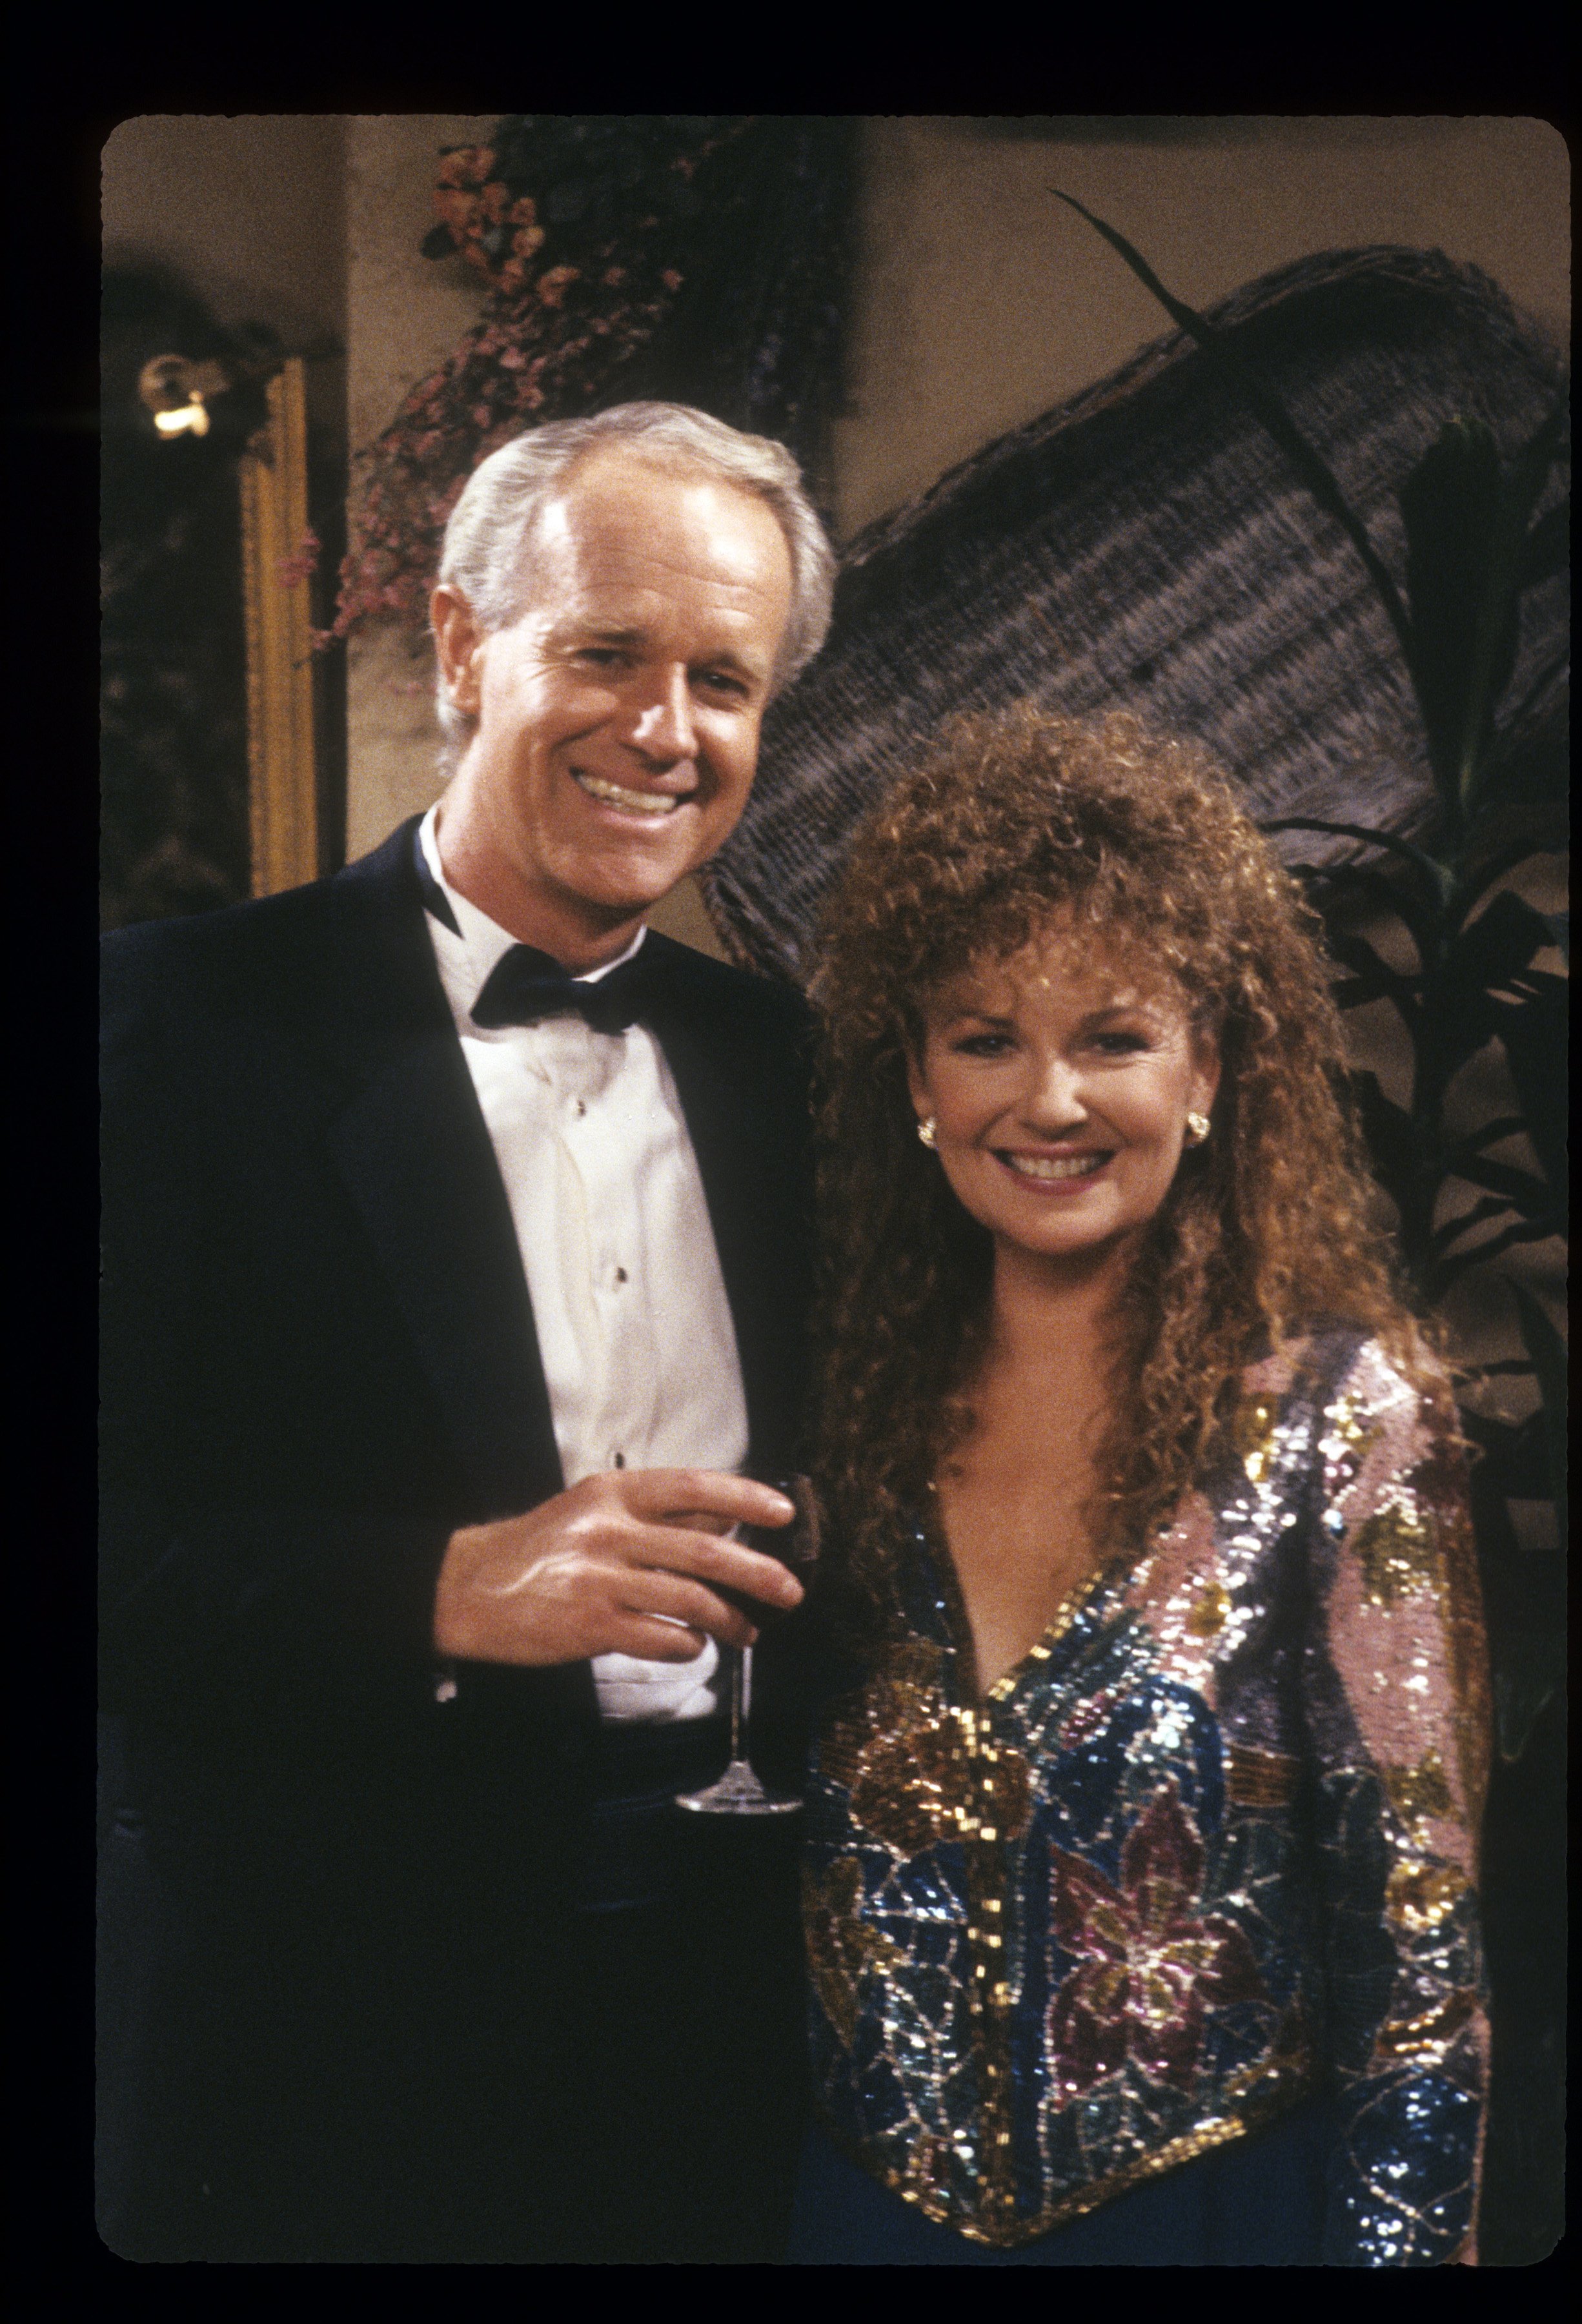 Shelley Fabares and Mike Farrell on the TV sitcom "Coach" in an episode titled "A Jerk At the Opera" aired on April 17, 1990. | Source: Getty Images